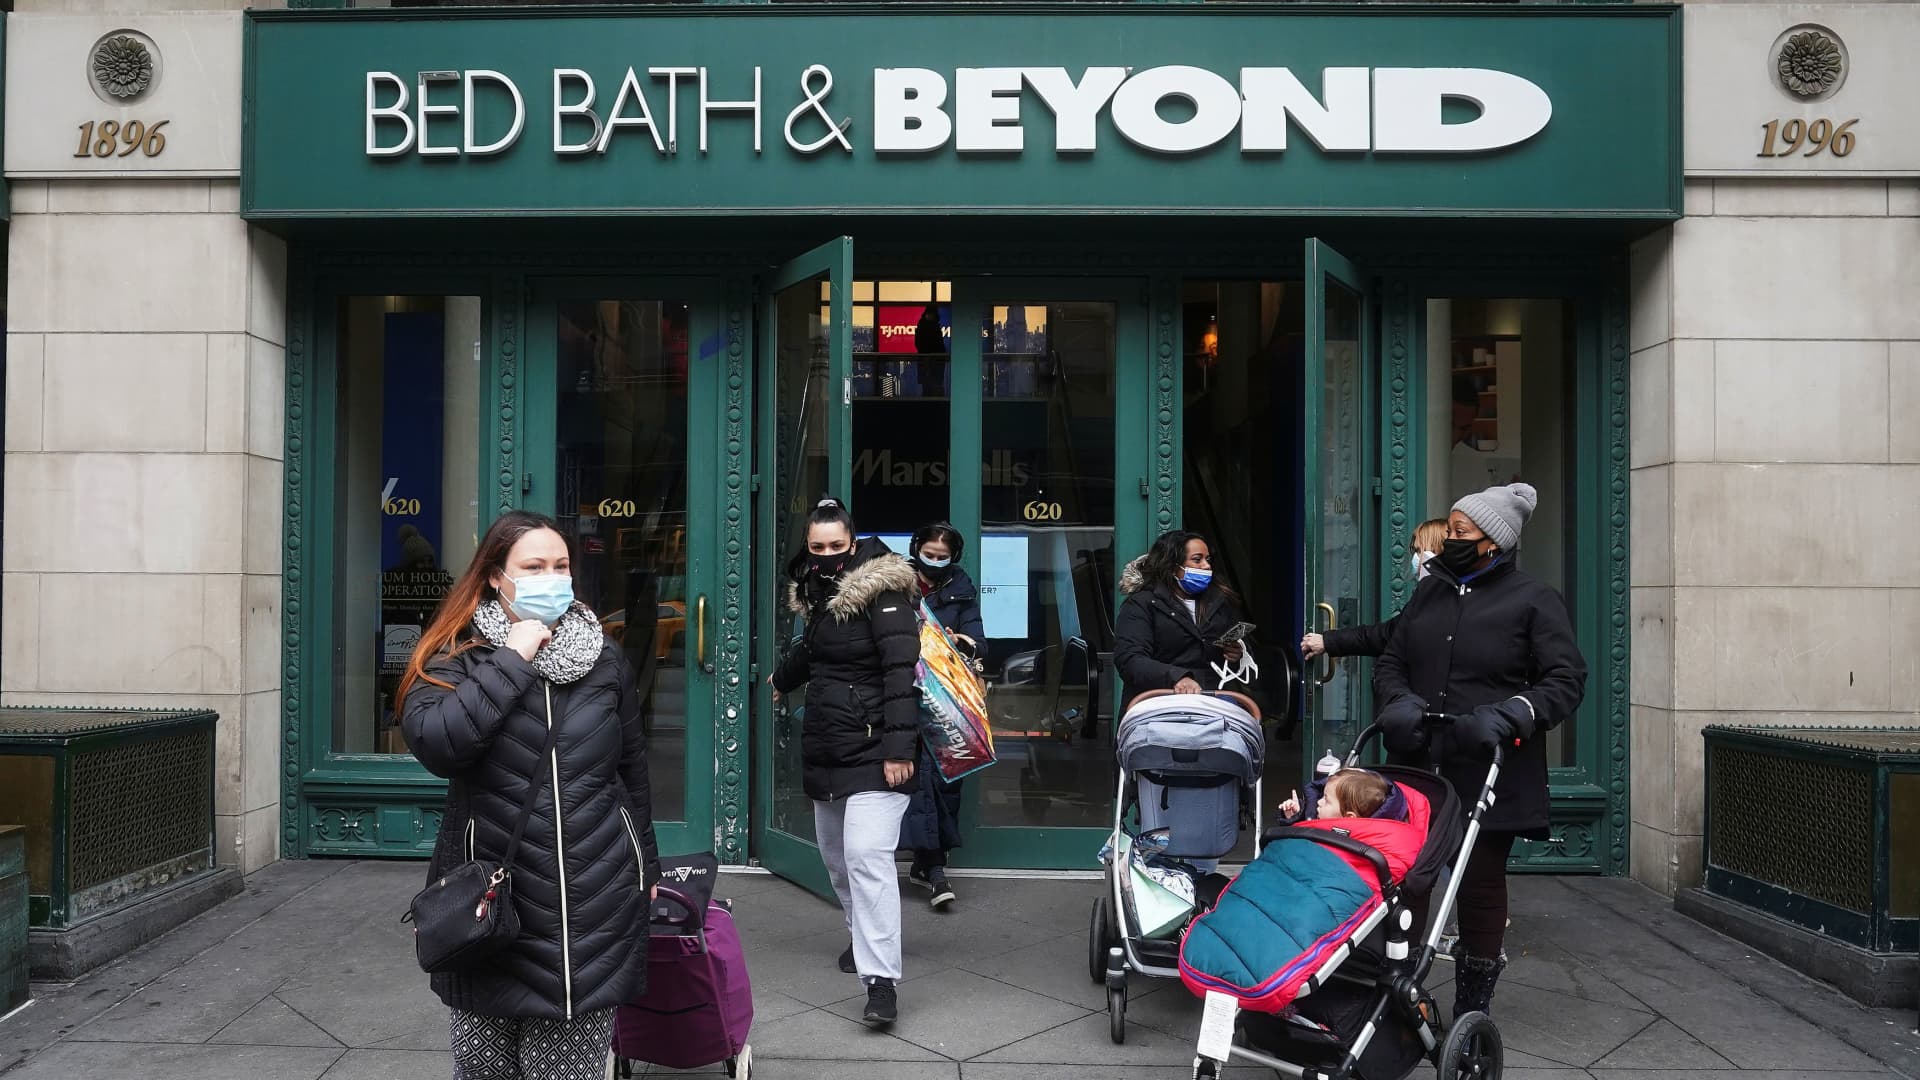 People walk out of a Bed Bath & Beyond store amid the coronavirus disease (COVID-19) pandemic in New York, January 27, 2021.